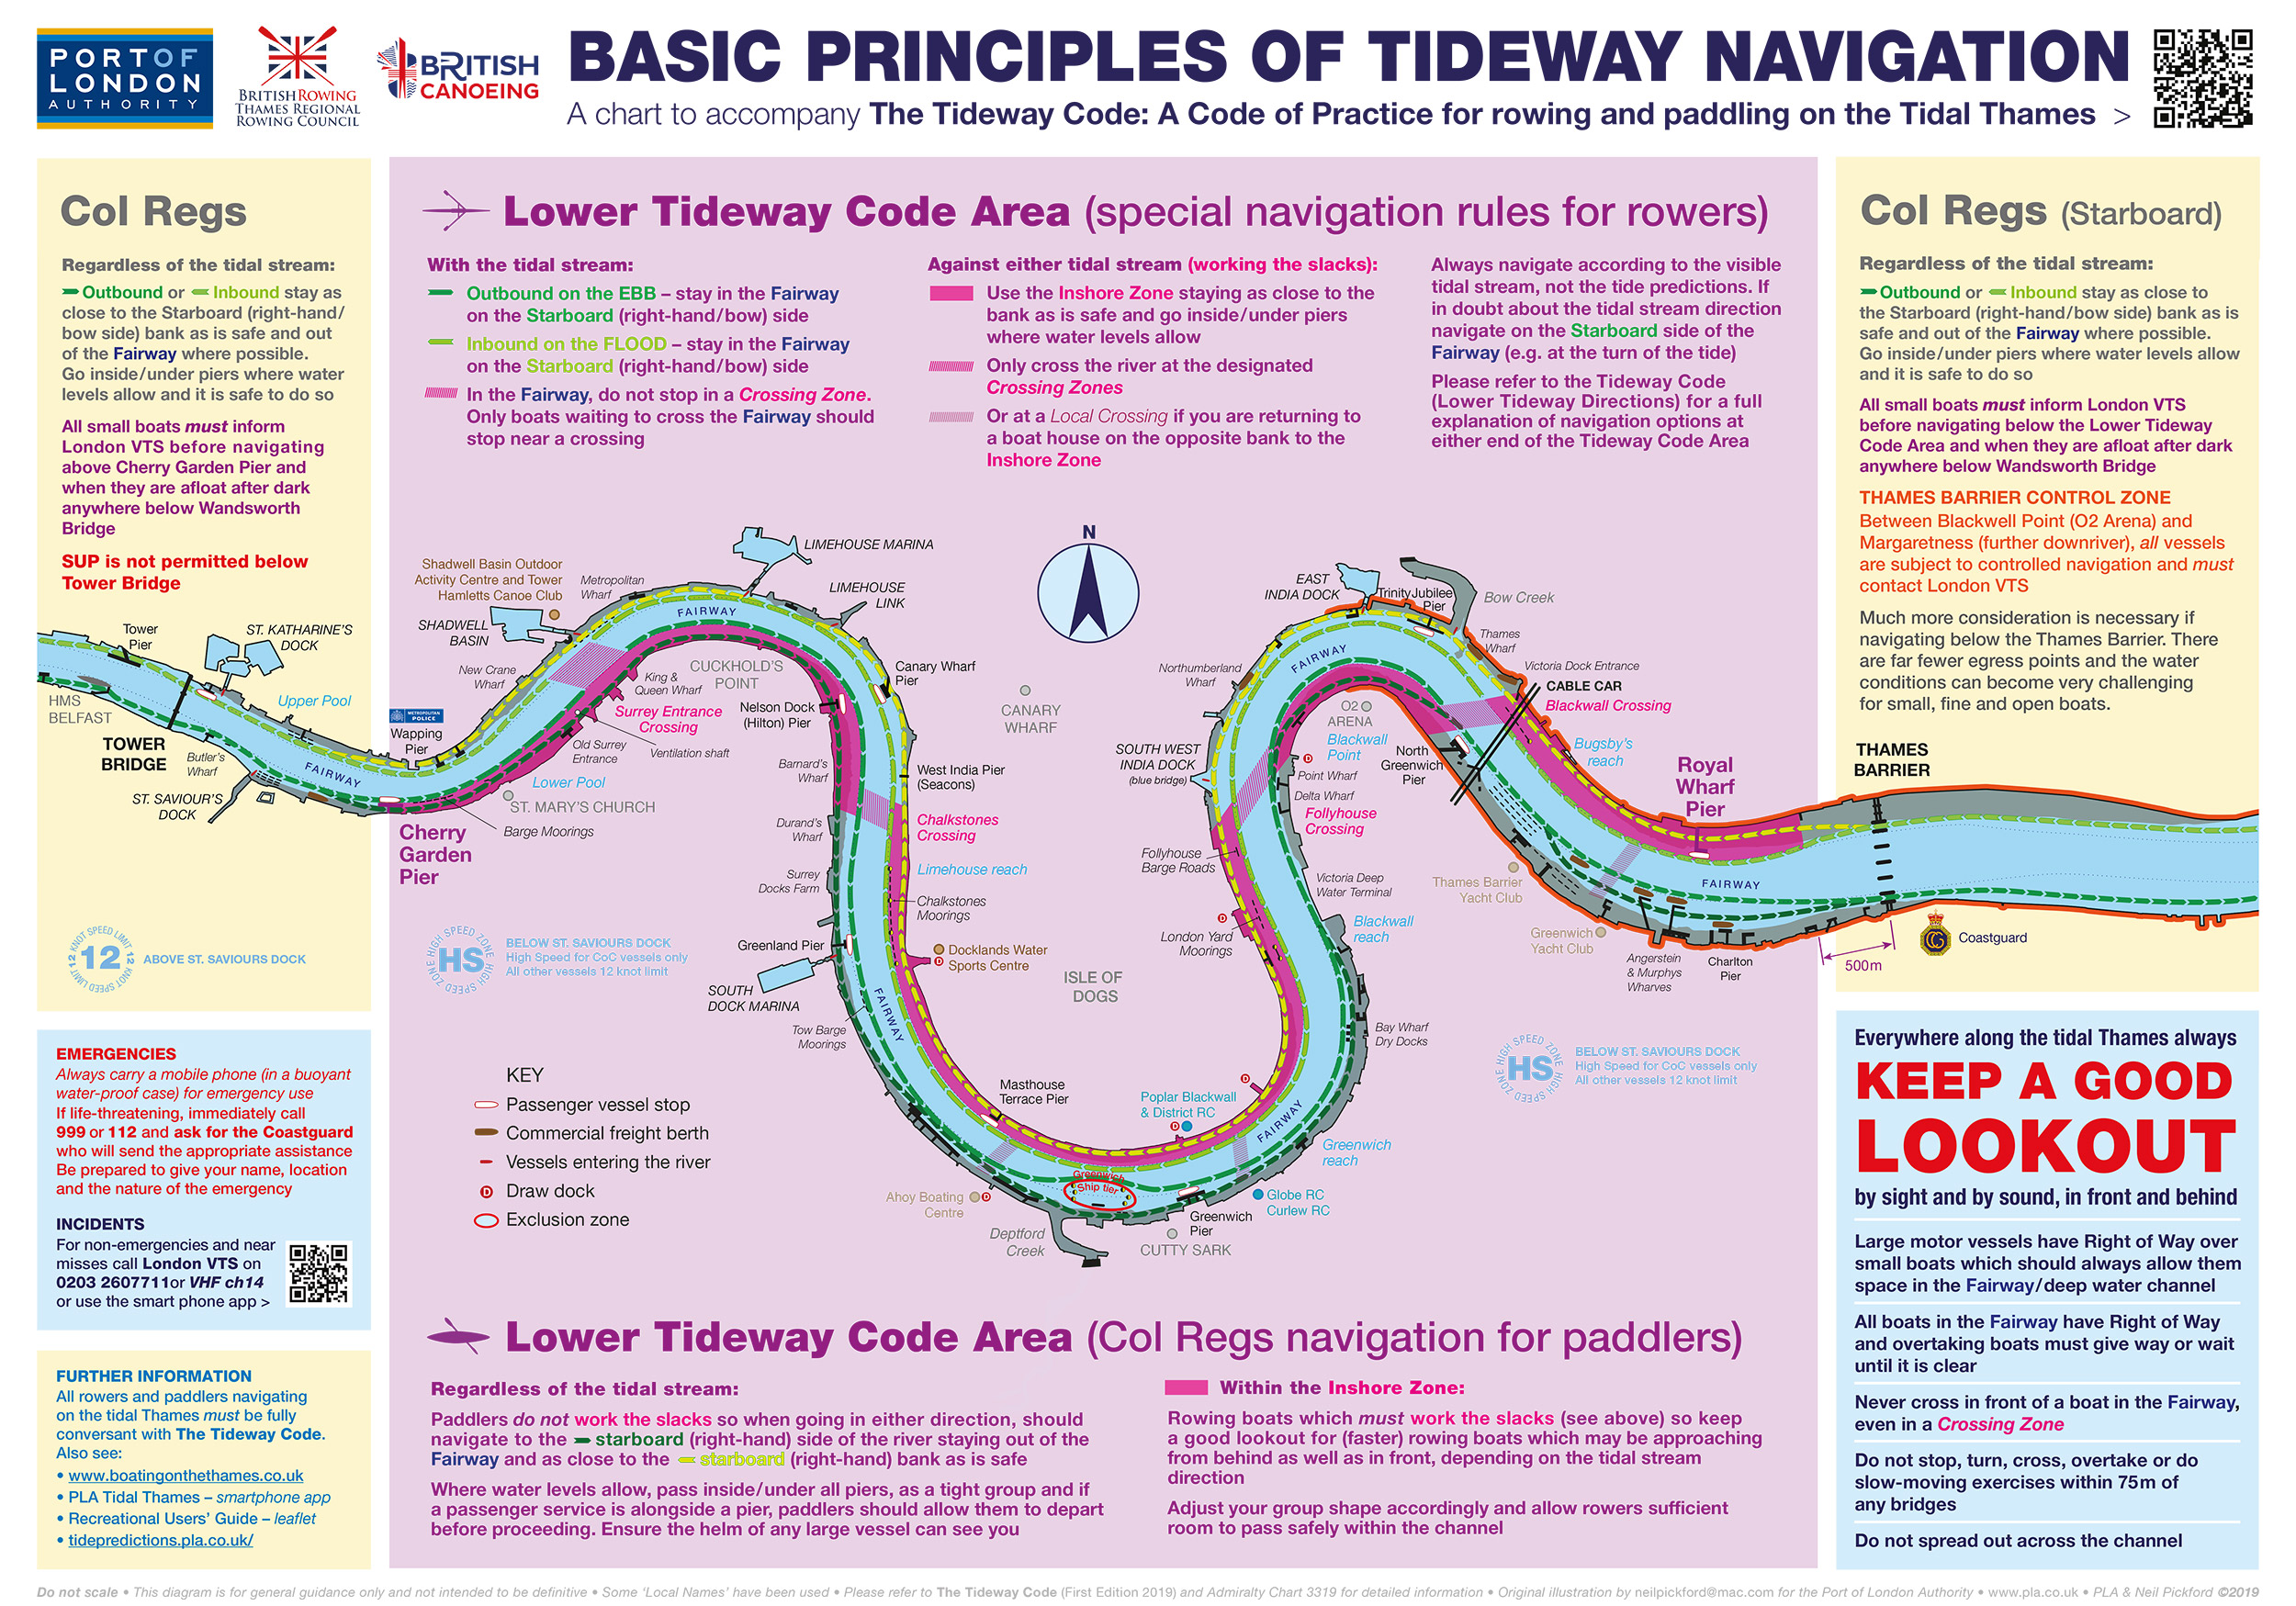 Basic principles of tideway navigation in the lower River Thames